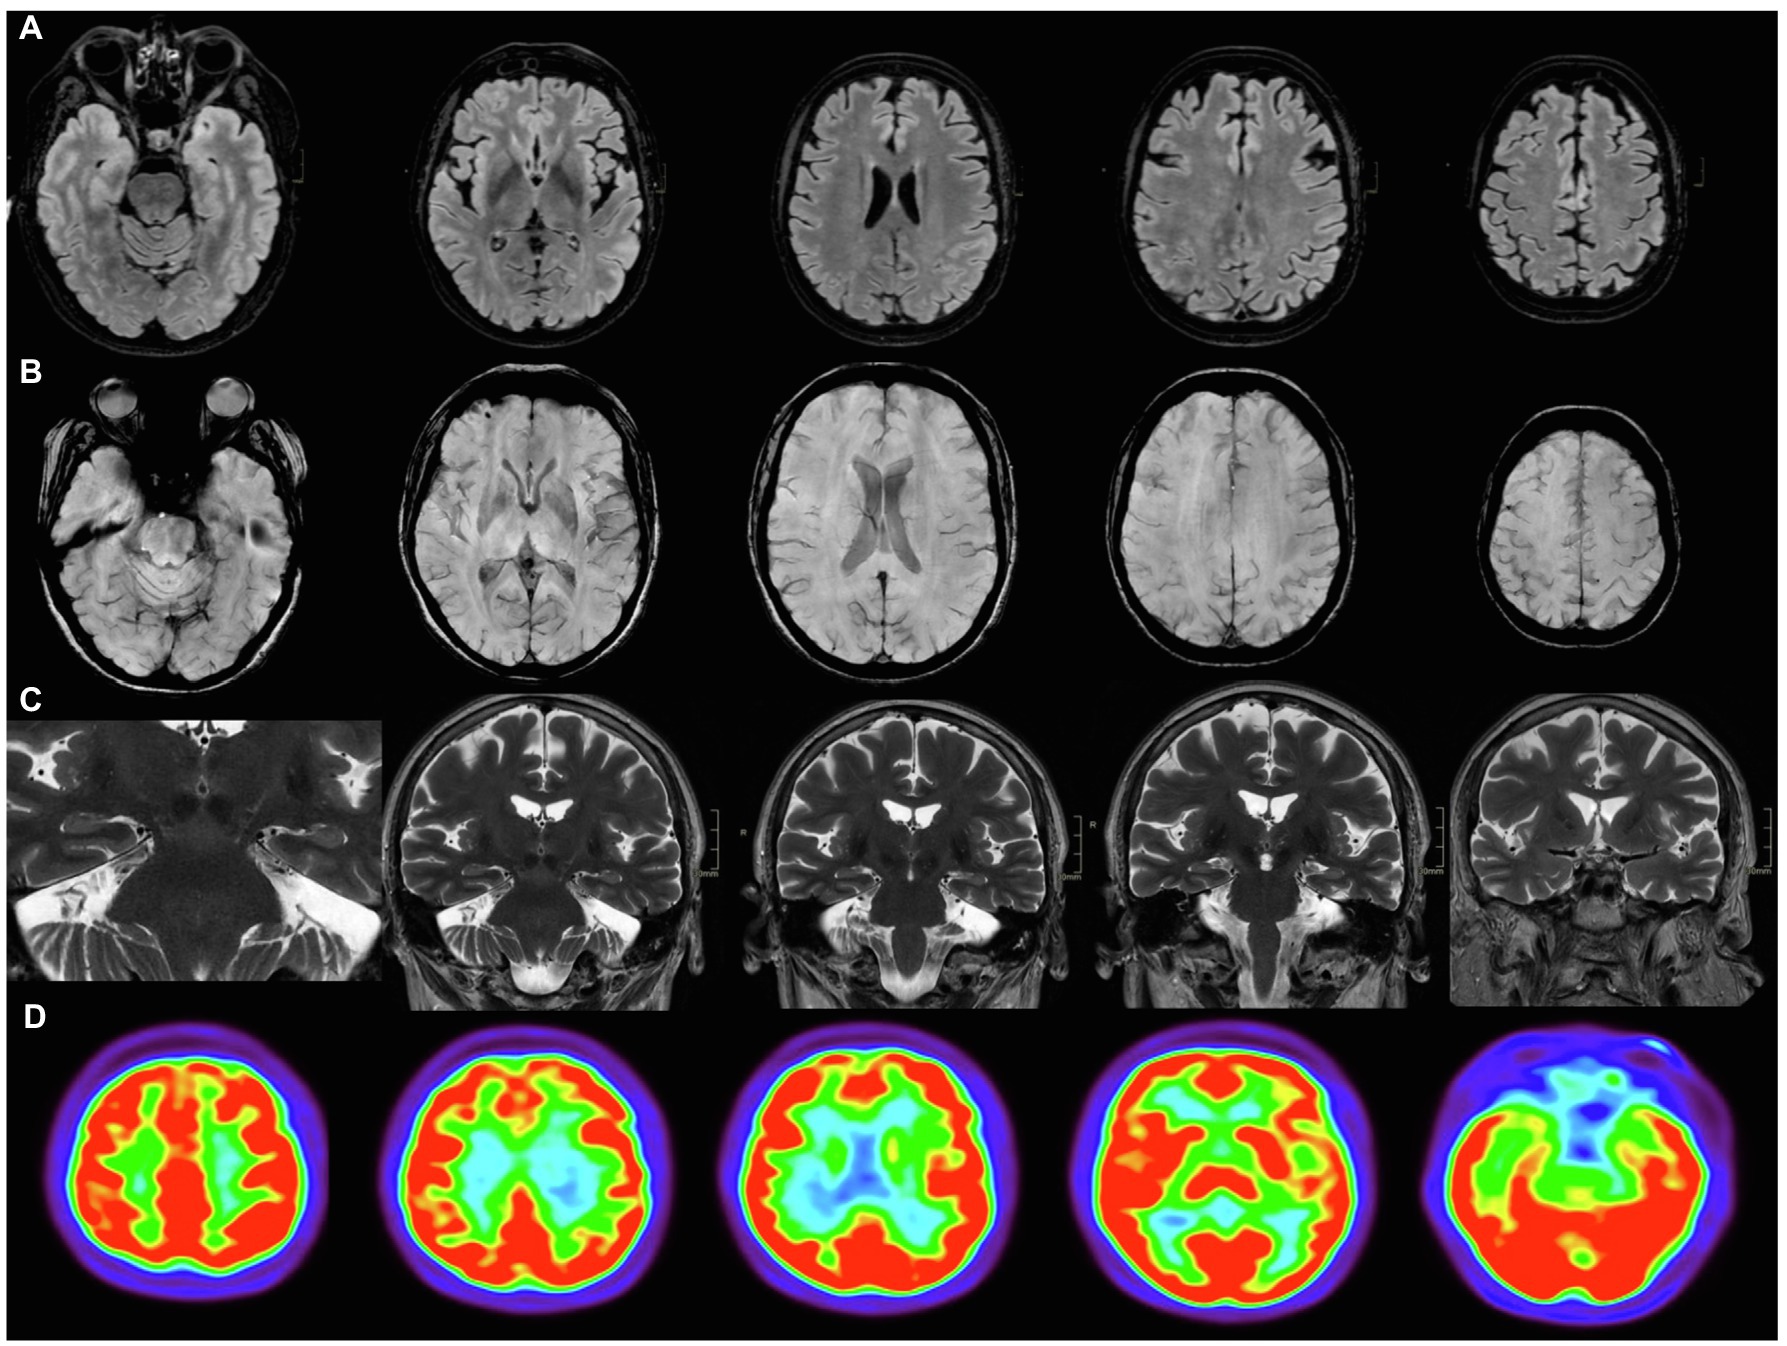 Frontiers  “Brain Fog” by COVID-19 or Alzheimer's Disease? A Case